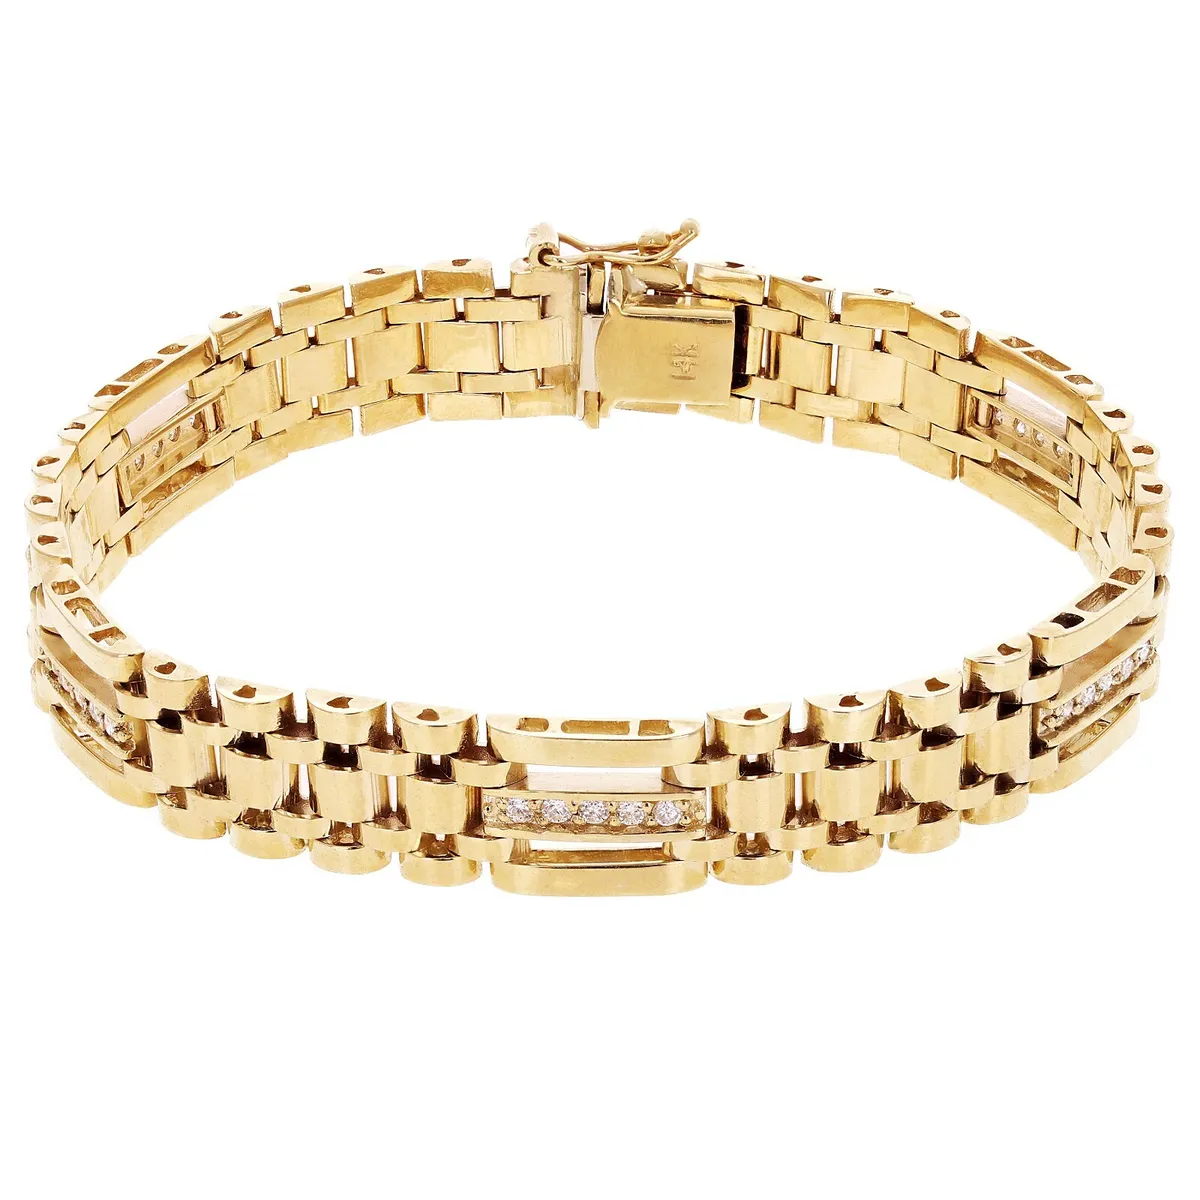 BOSS - Gold-tone watch with link bracelet